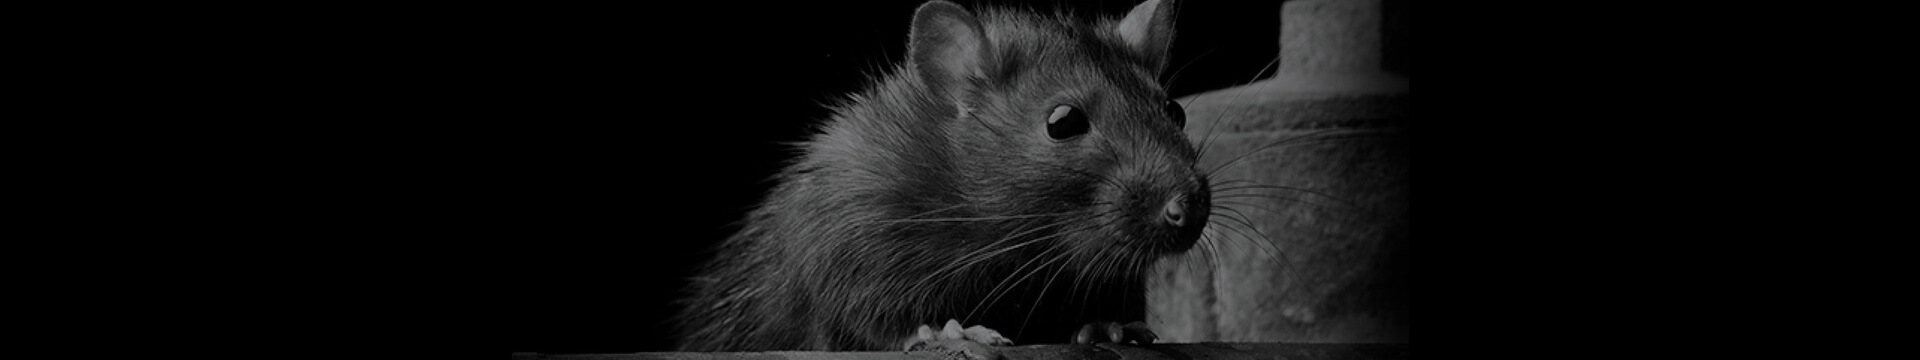 The Impact of Covid on Rats